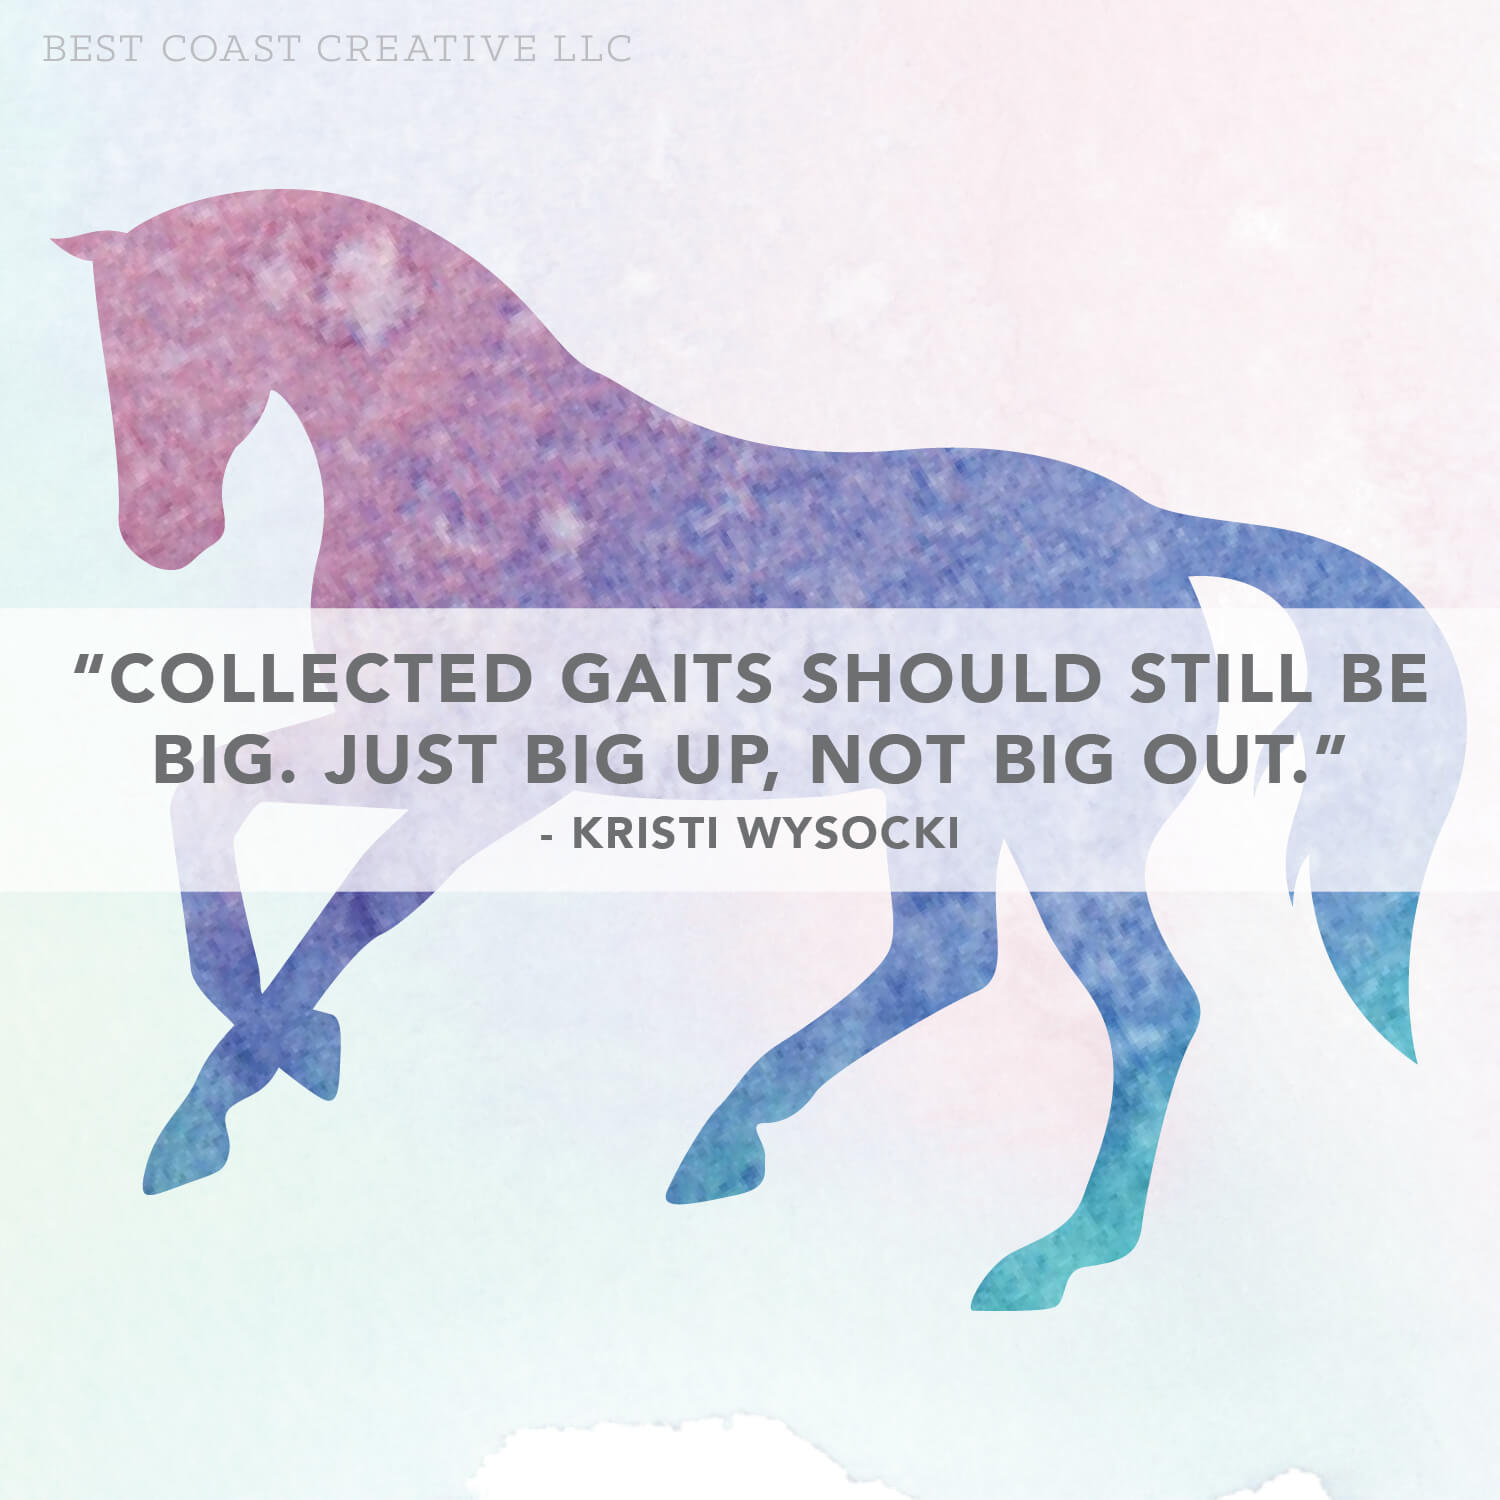 Horse Illustration with Kristi Wysocki clinic quote “Collected gaits should still be big. Just big up, not big out.”